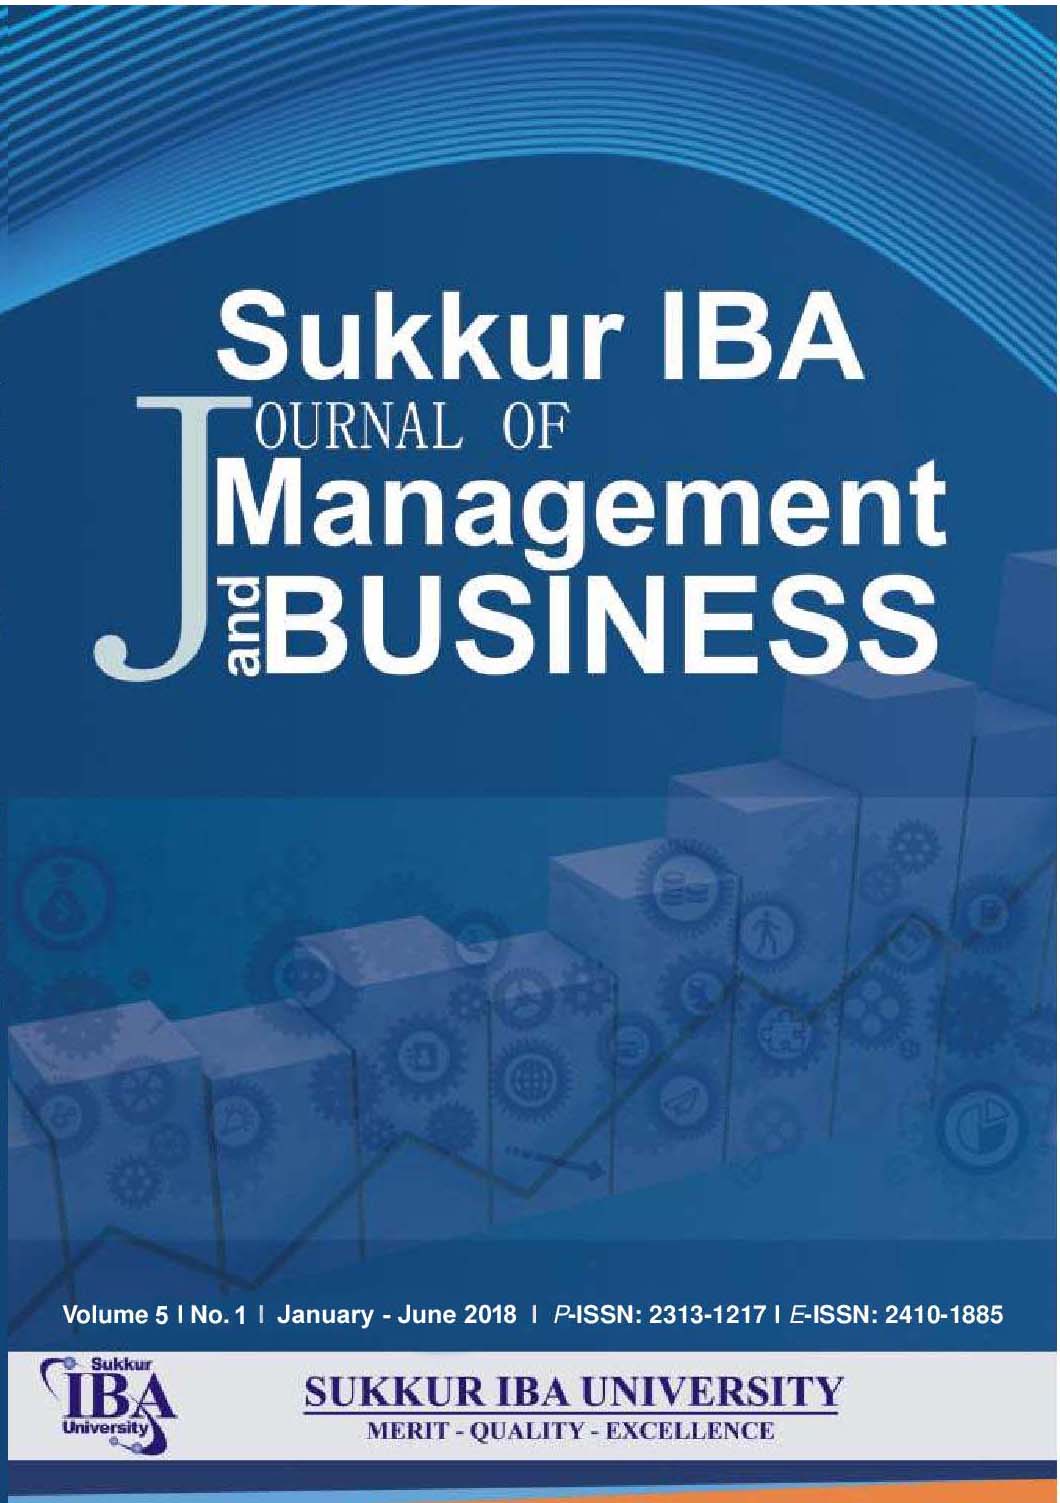 					View Vol. 5 No. 1 (2018): Sukkur IBA Journal Of Management and Business
				